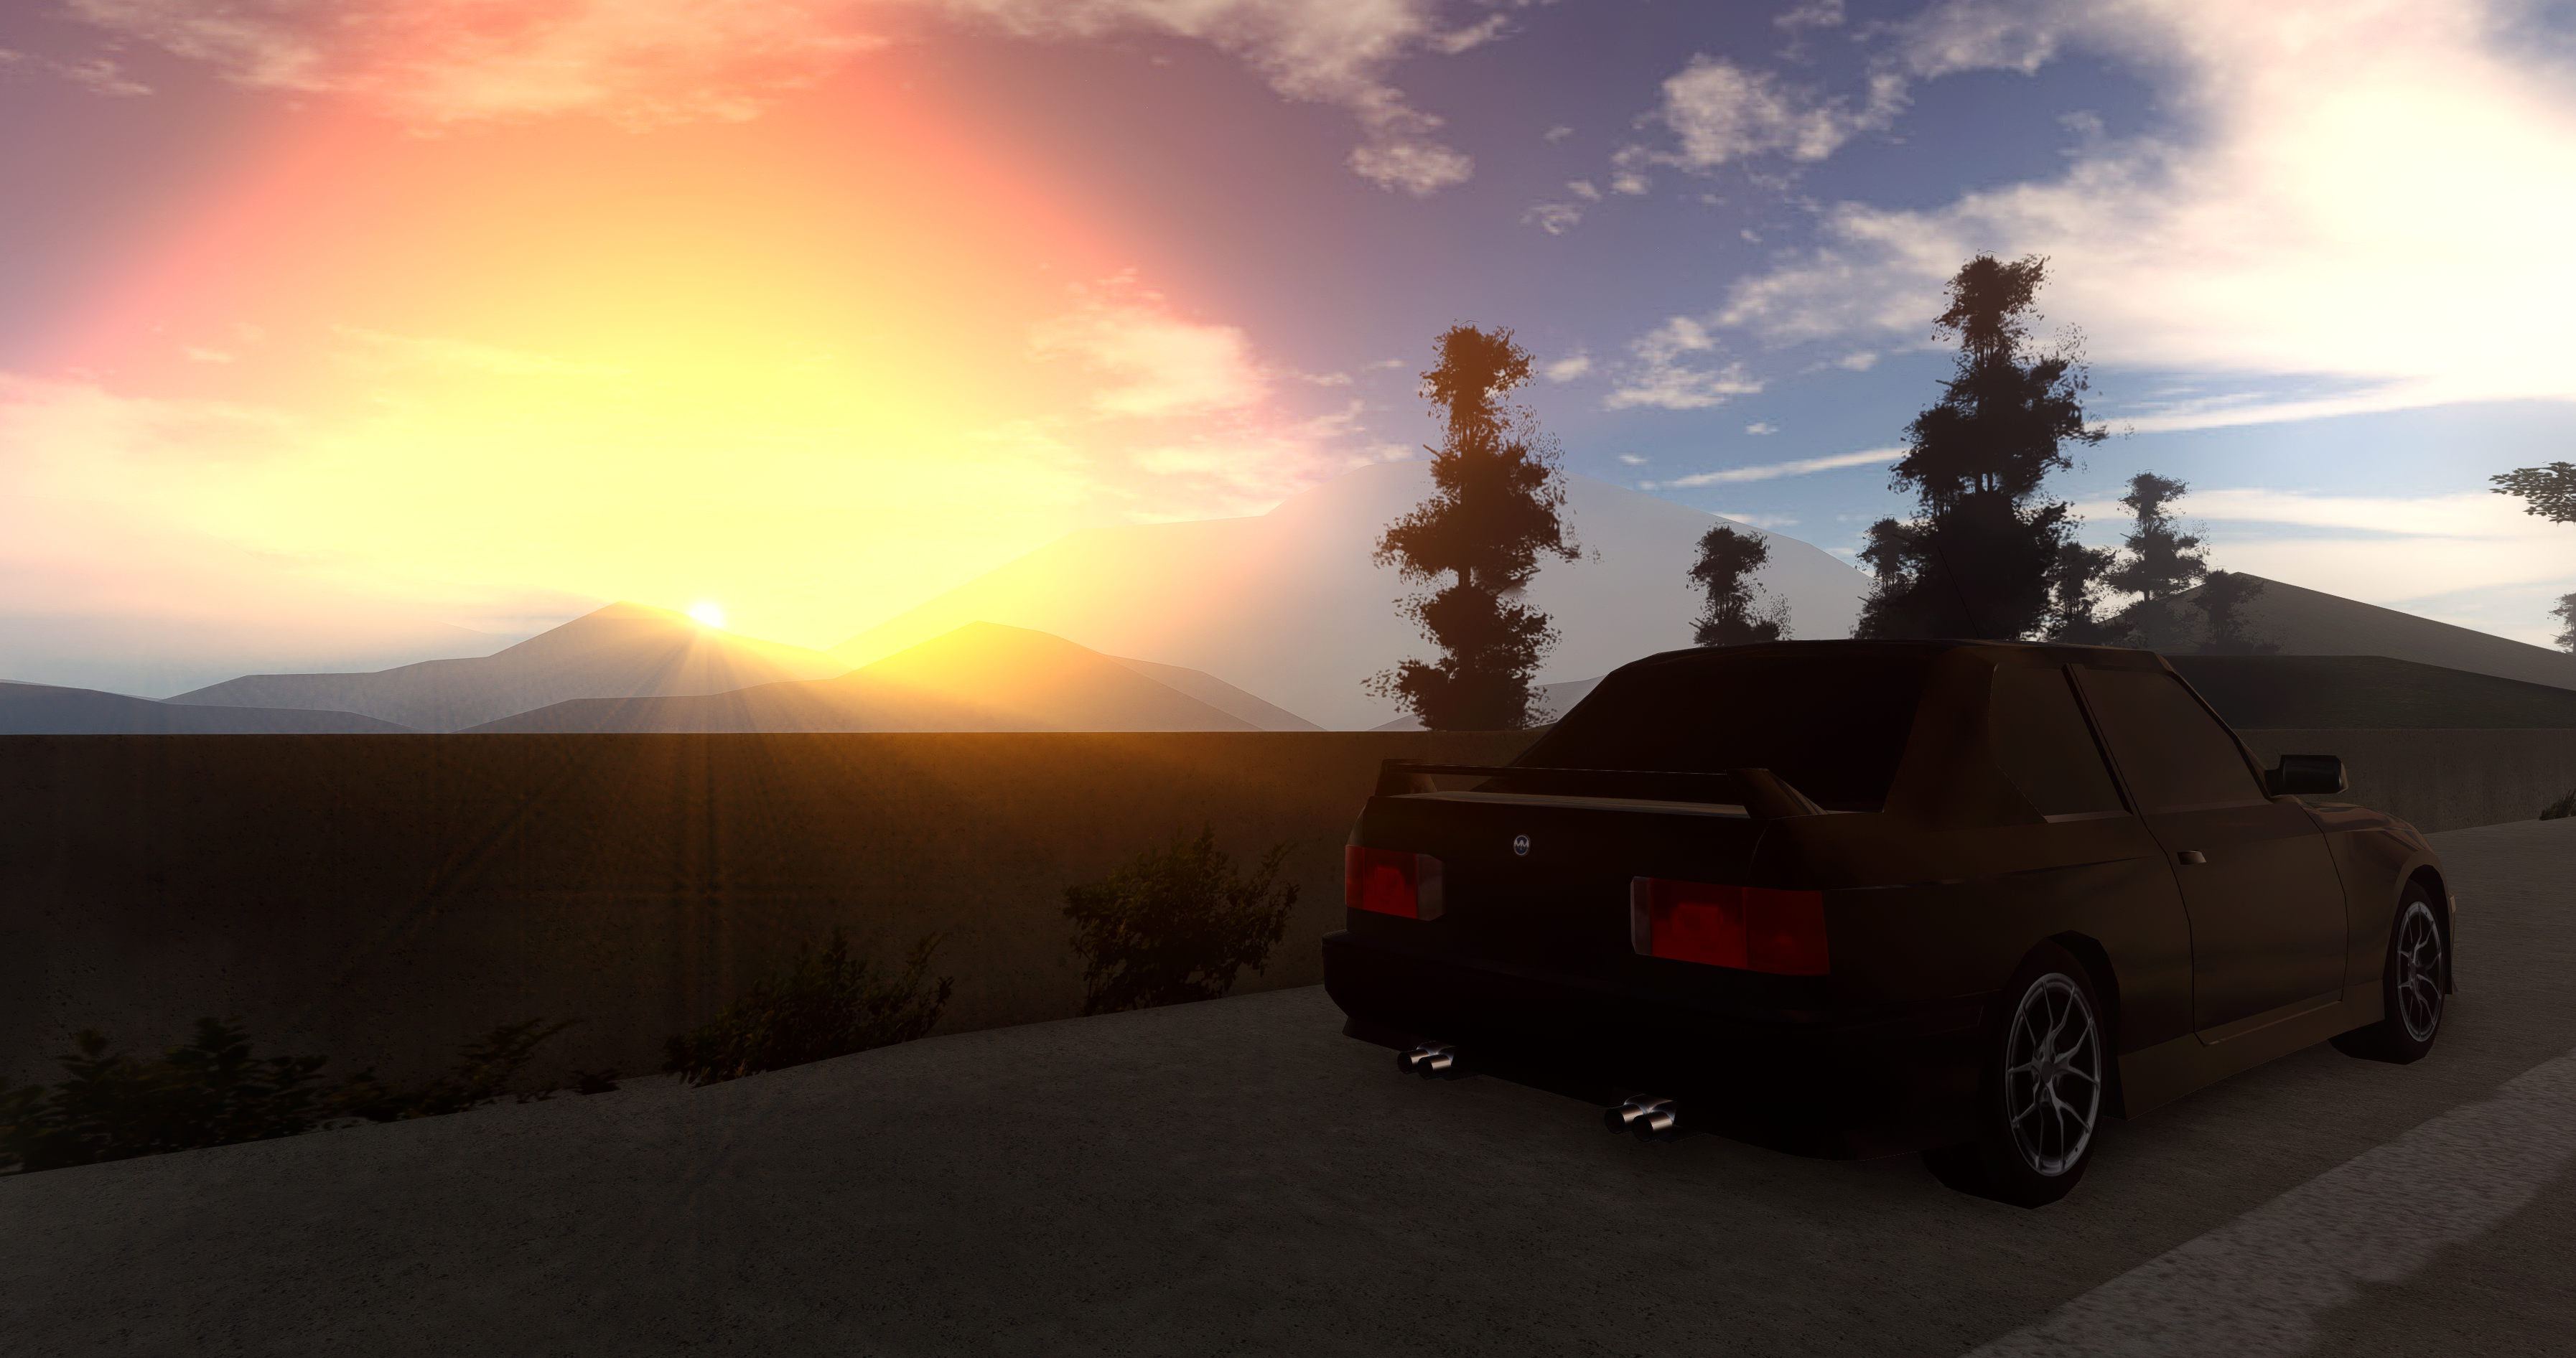 Bmw E30 M3 Sunset Mountains Traffic Barrier Highway Trees Roblox Pacifico Roblox Game Clouds 3588x1892